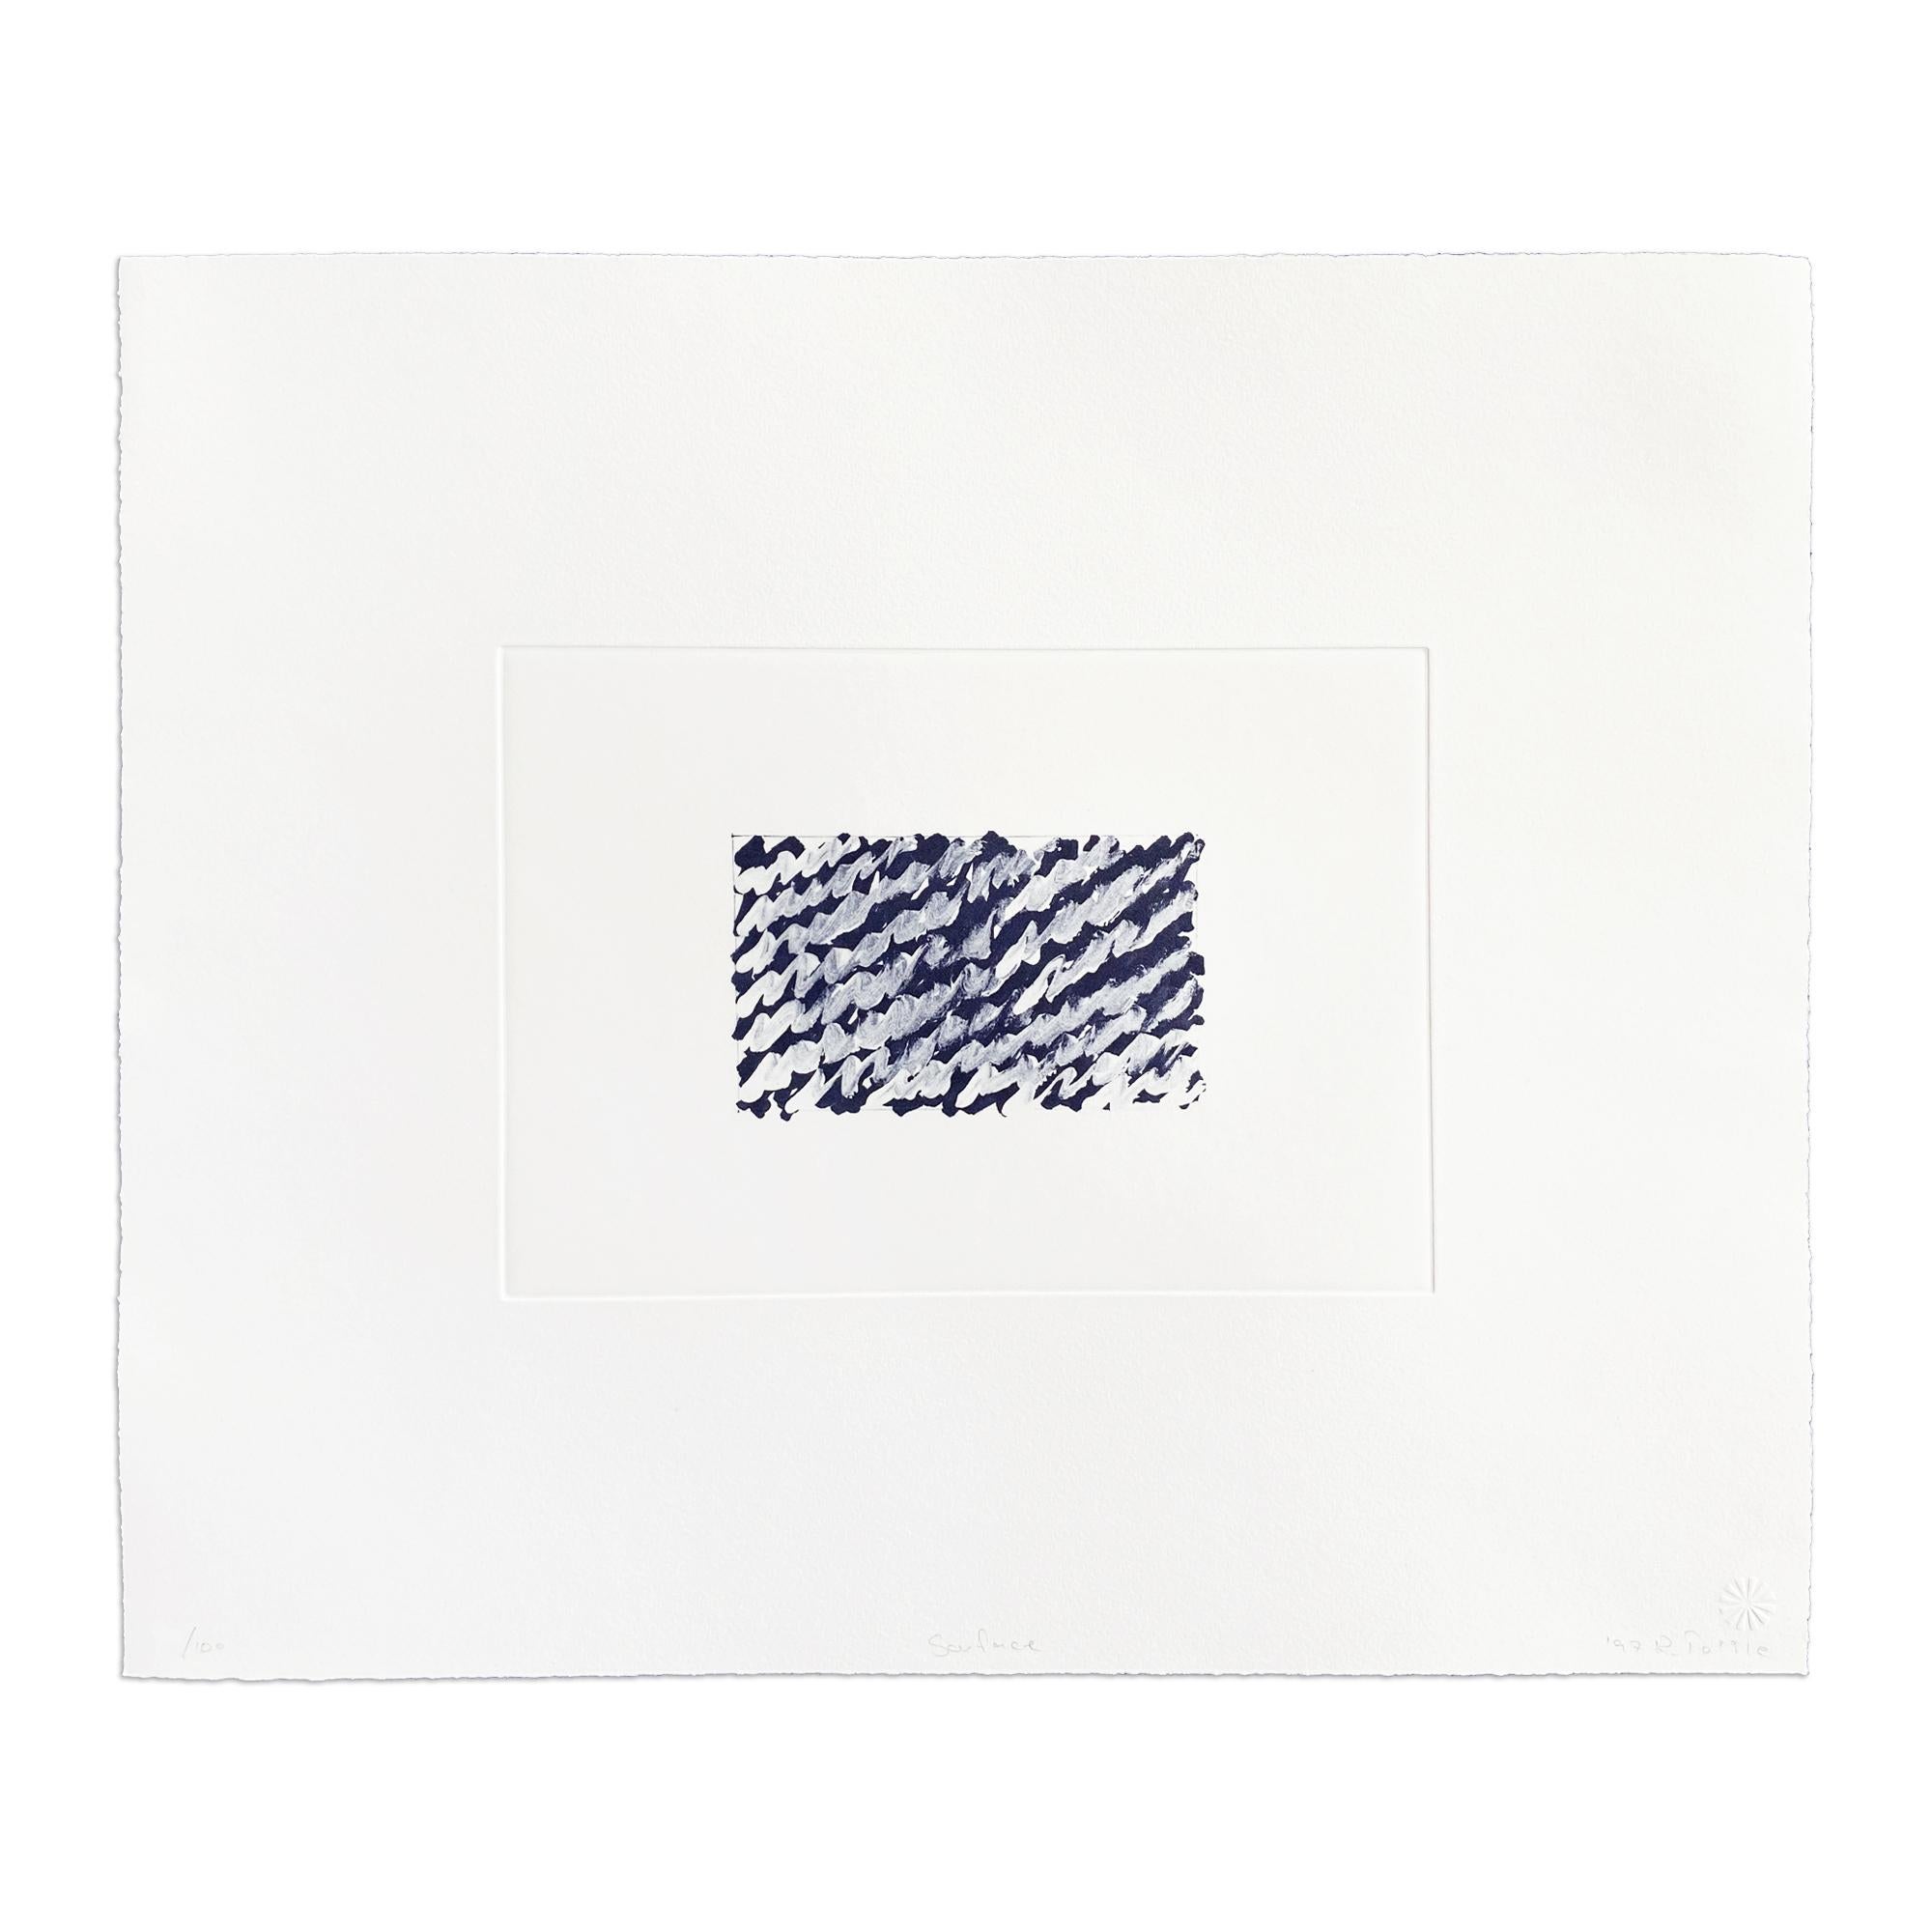 Richard Tuttle (American, b. 1941)
Surface, 1997
Medium: Photogravure on wove paper
Dimensions: 15 x 17-3/4 in
Edition of 100: Hand-signed and numbered
Condition: Excellent